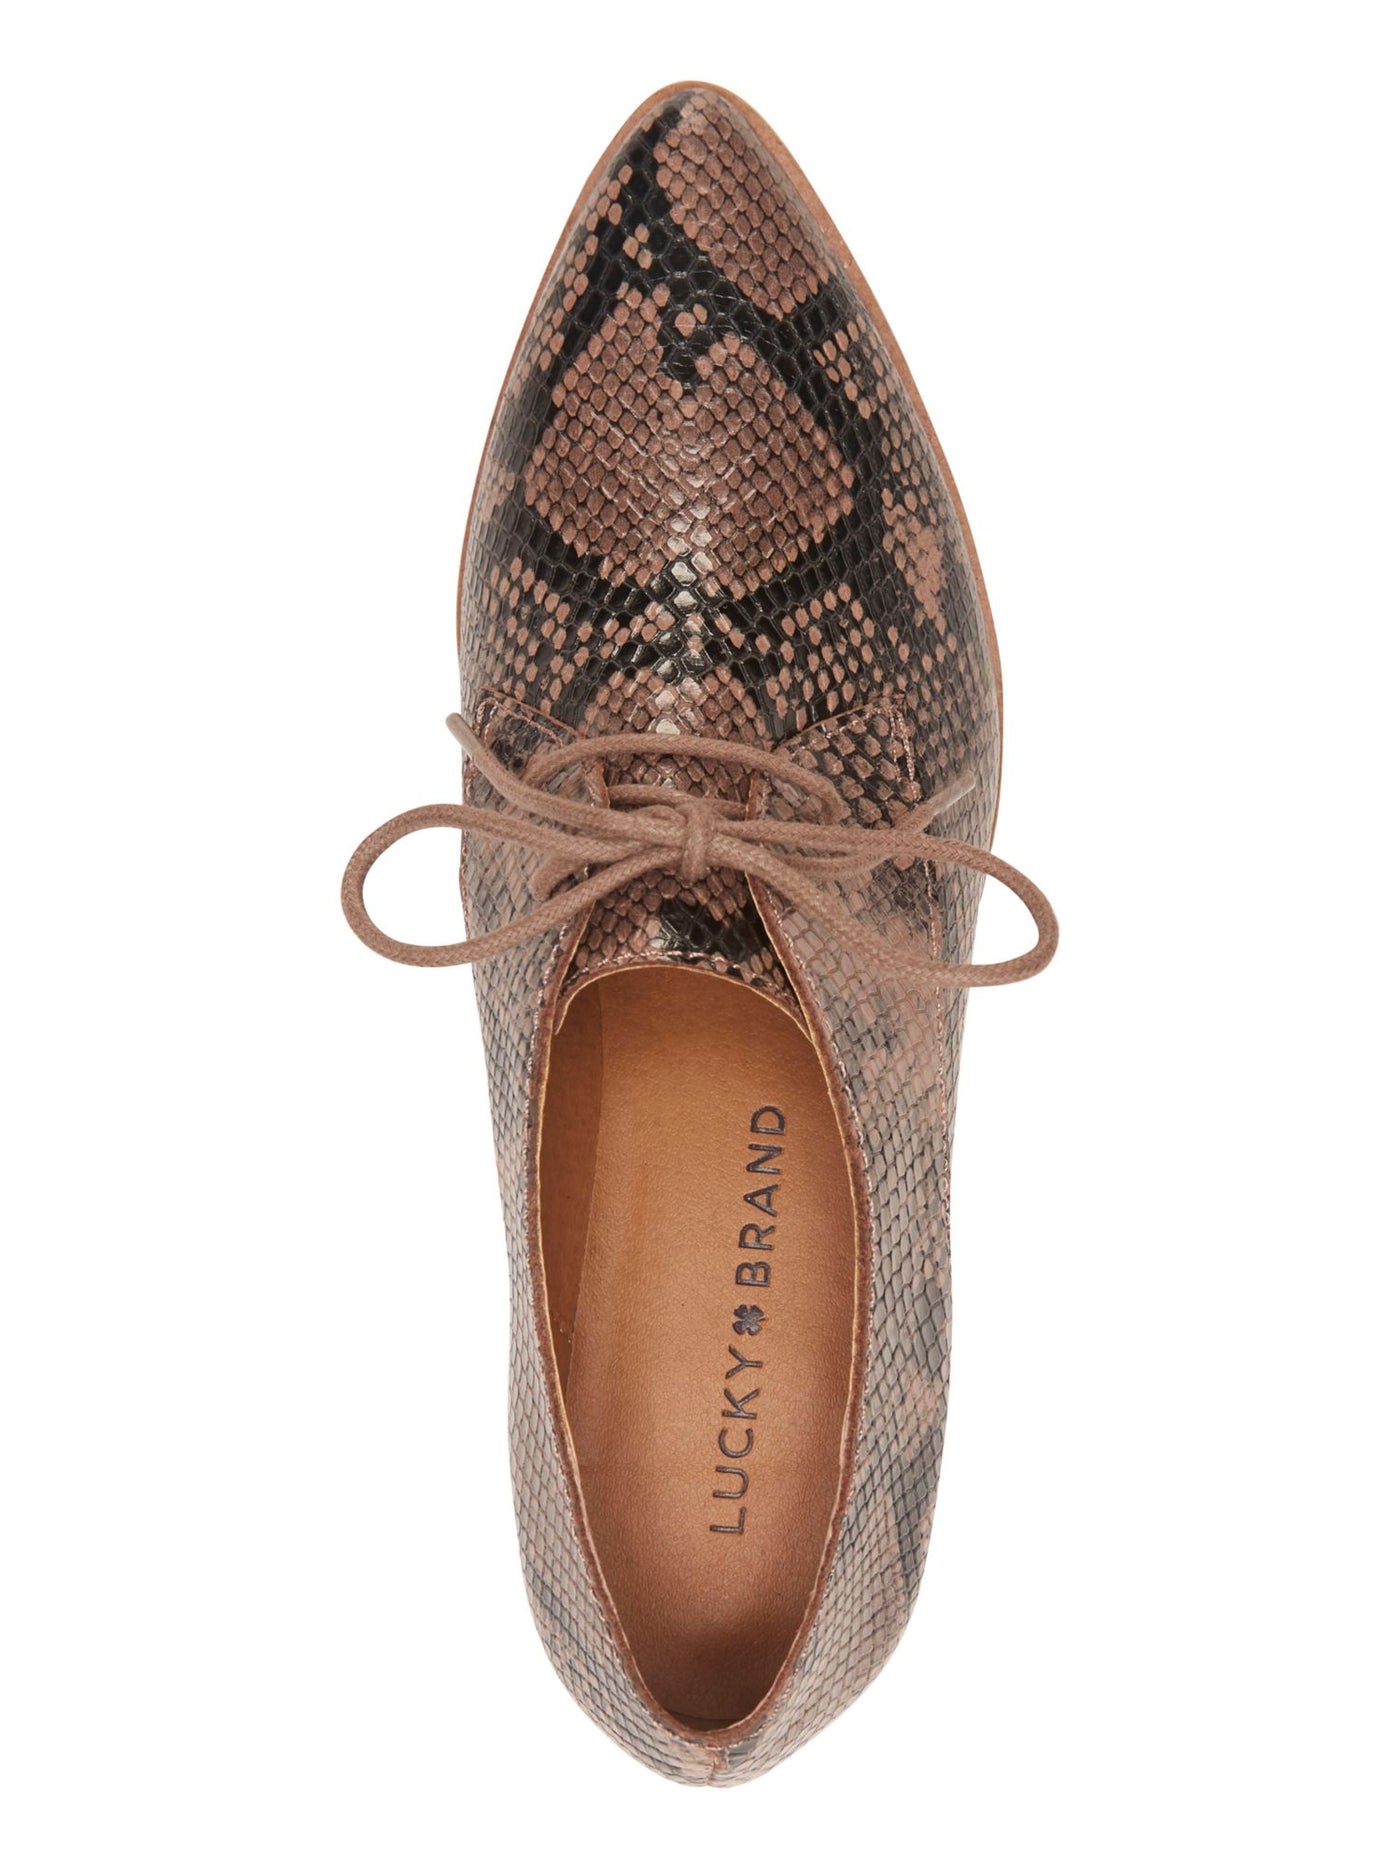 LUCKY BRAND Womens Brown Snake Menswear-Inspired Derby Cushioned Erreka Almond Toe Block Heel Lace-Up Leather Flats Shoes 12 M